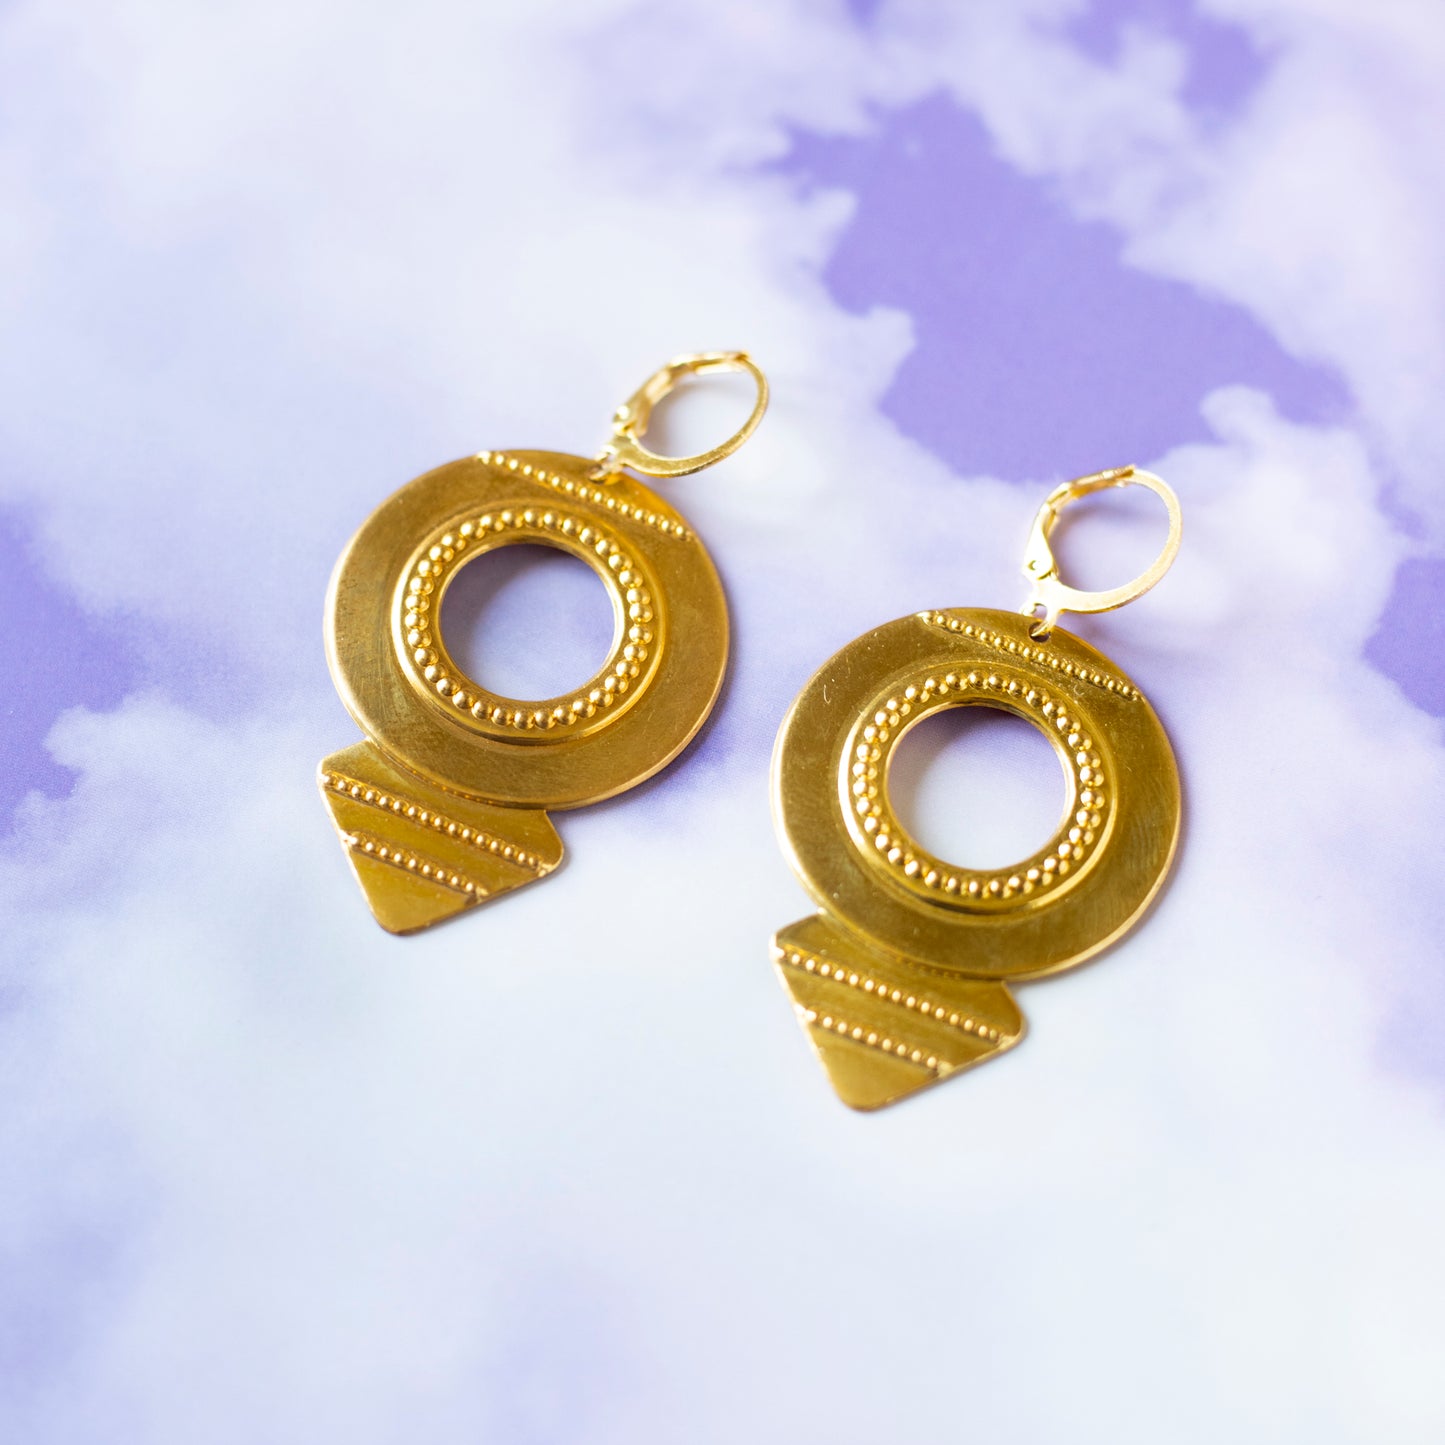 Earrings with old Art Deco style prints